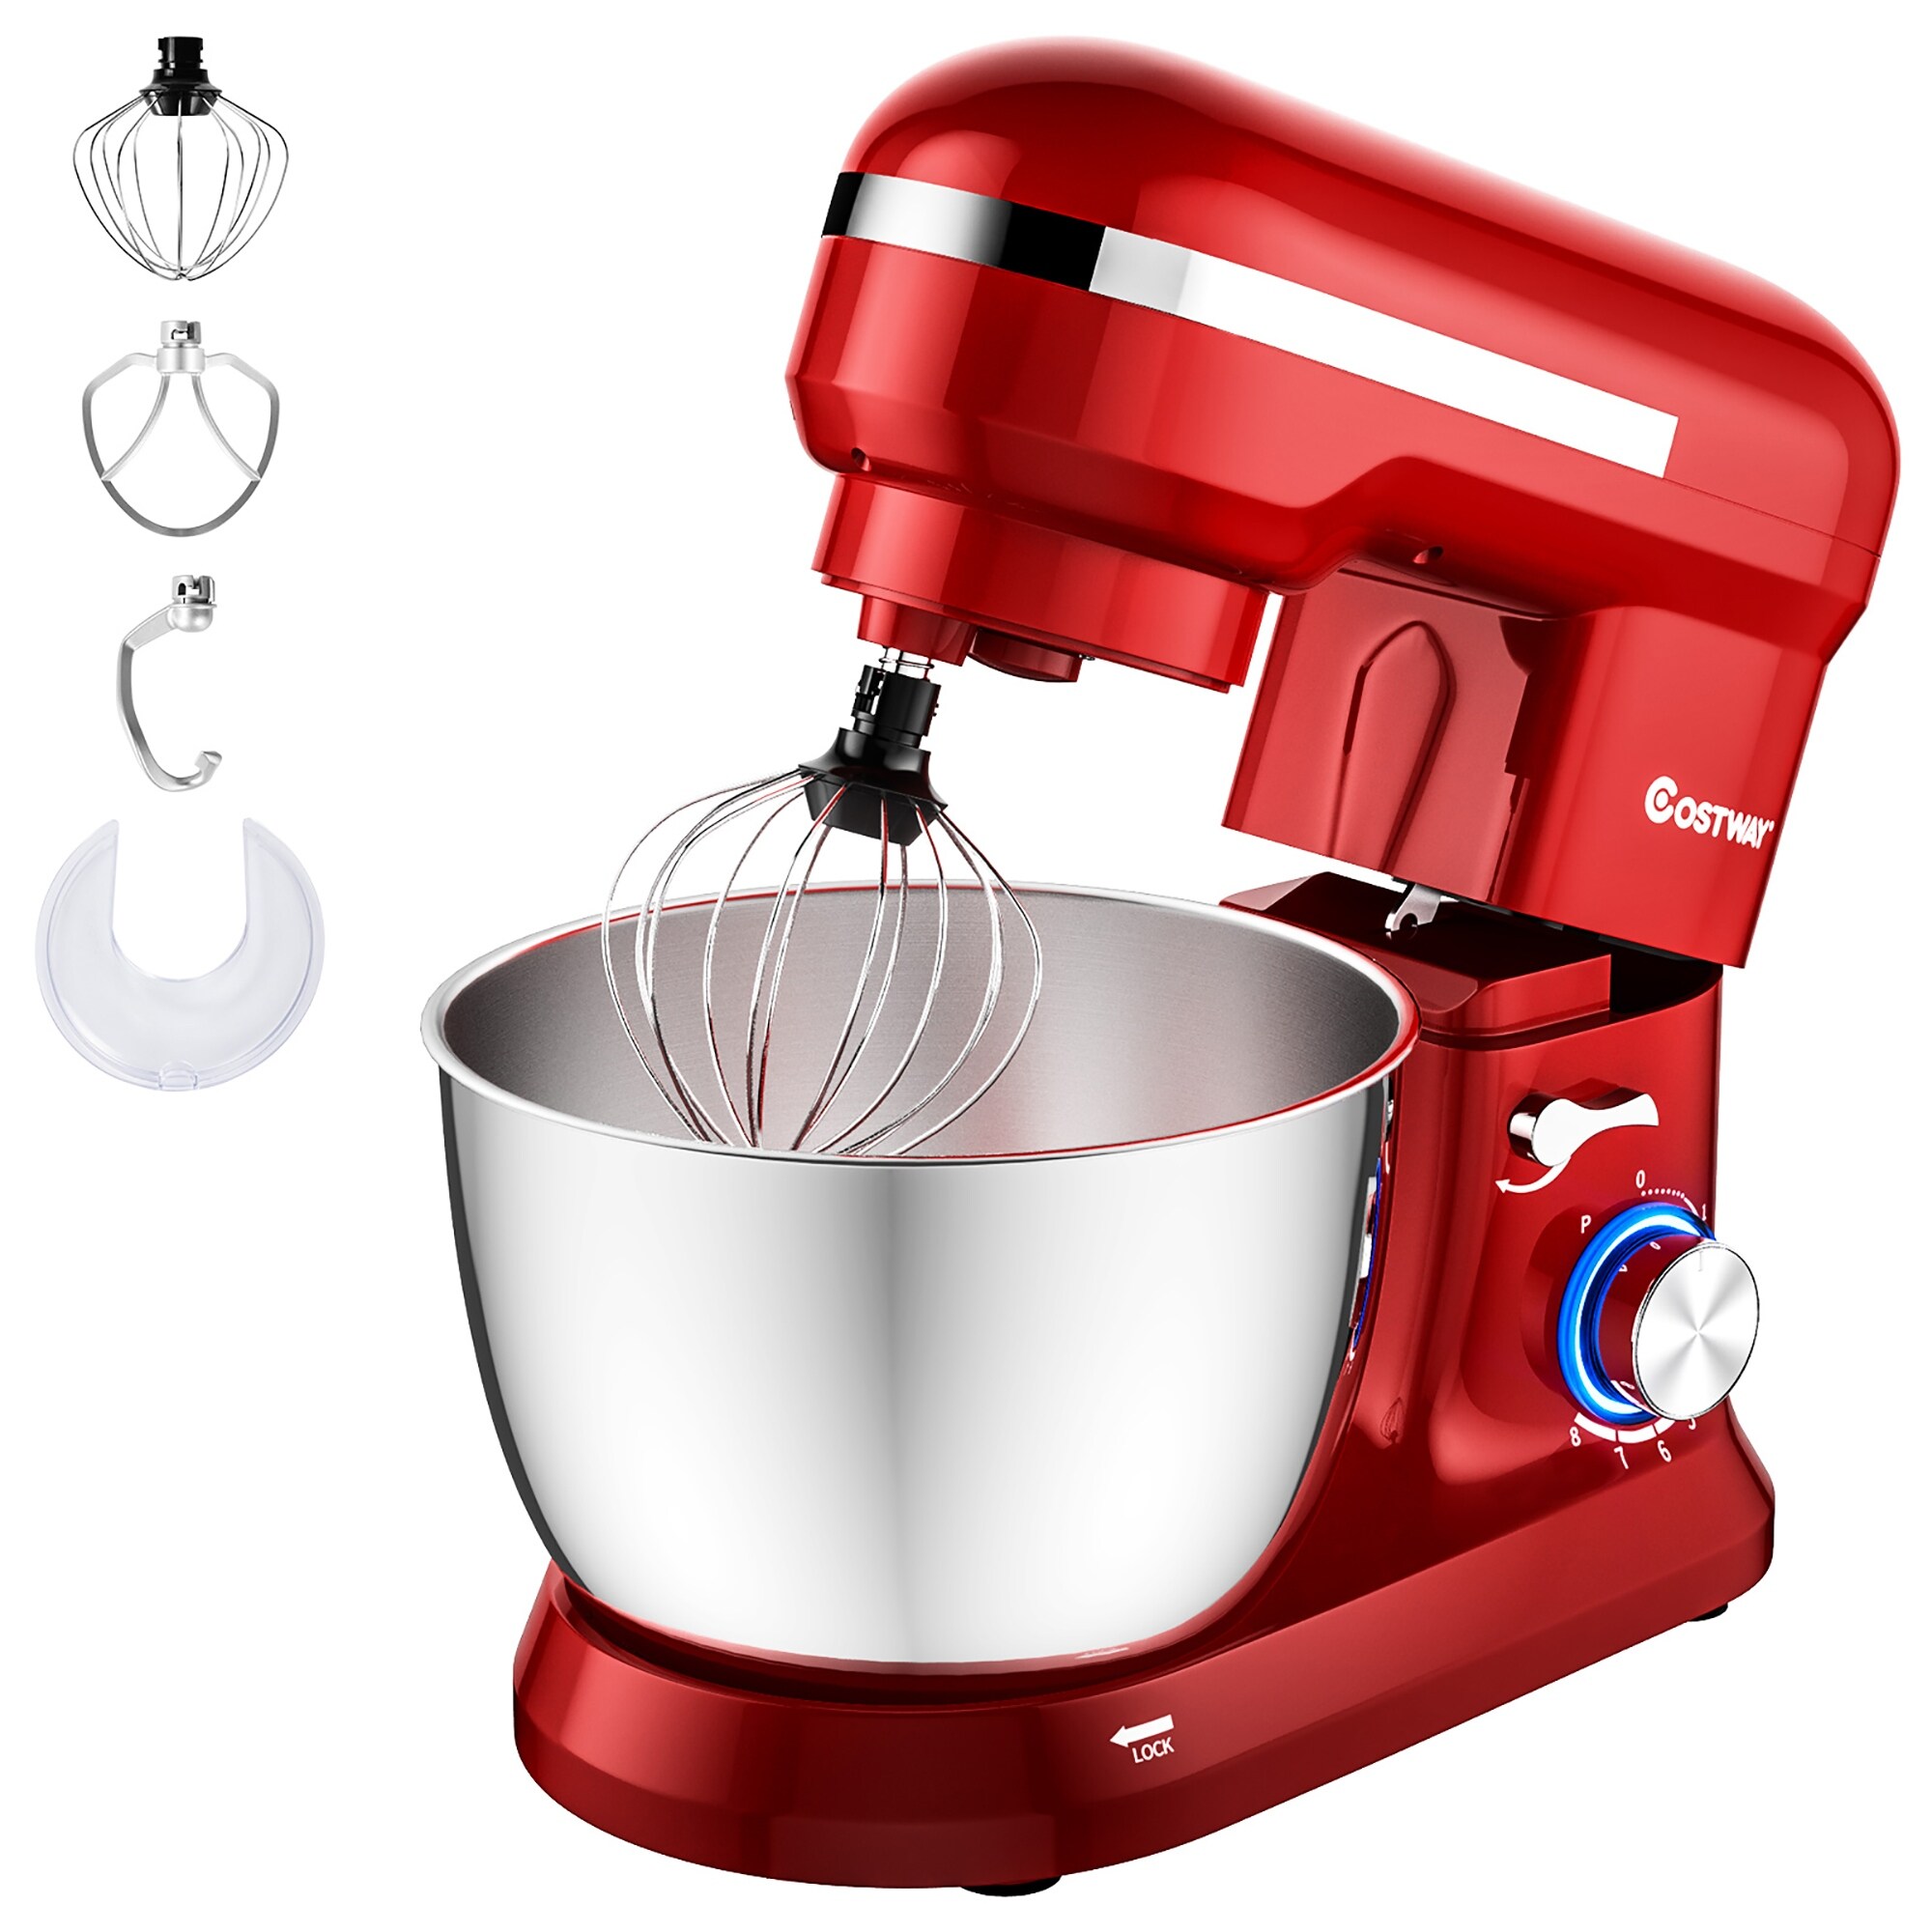  Hamilton Beach All-Metal 12-Speed Electric Stand Mixer